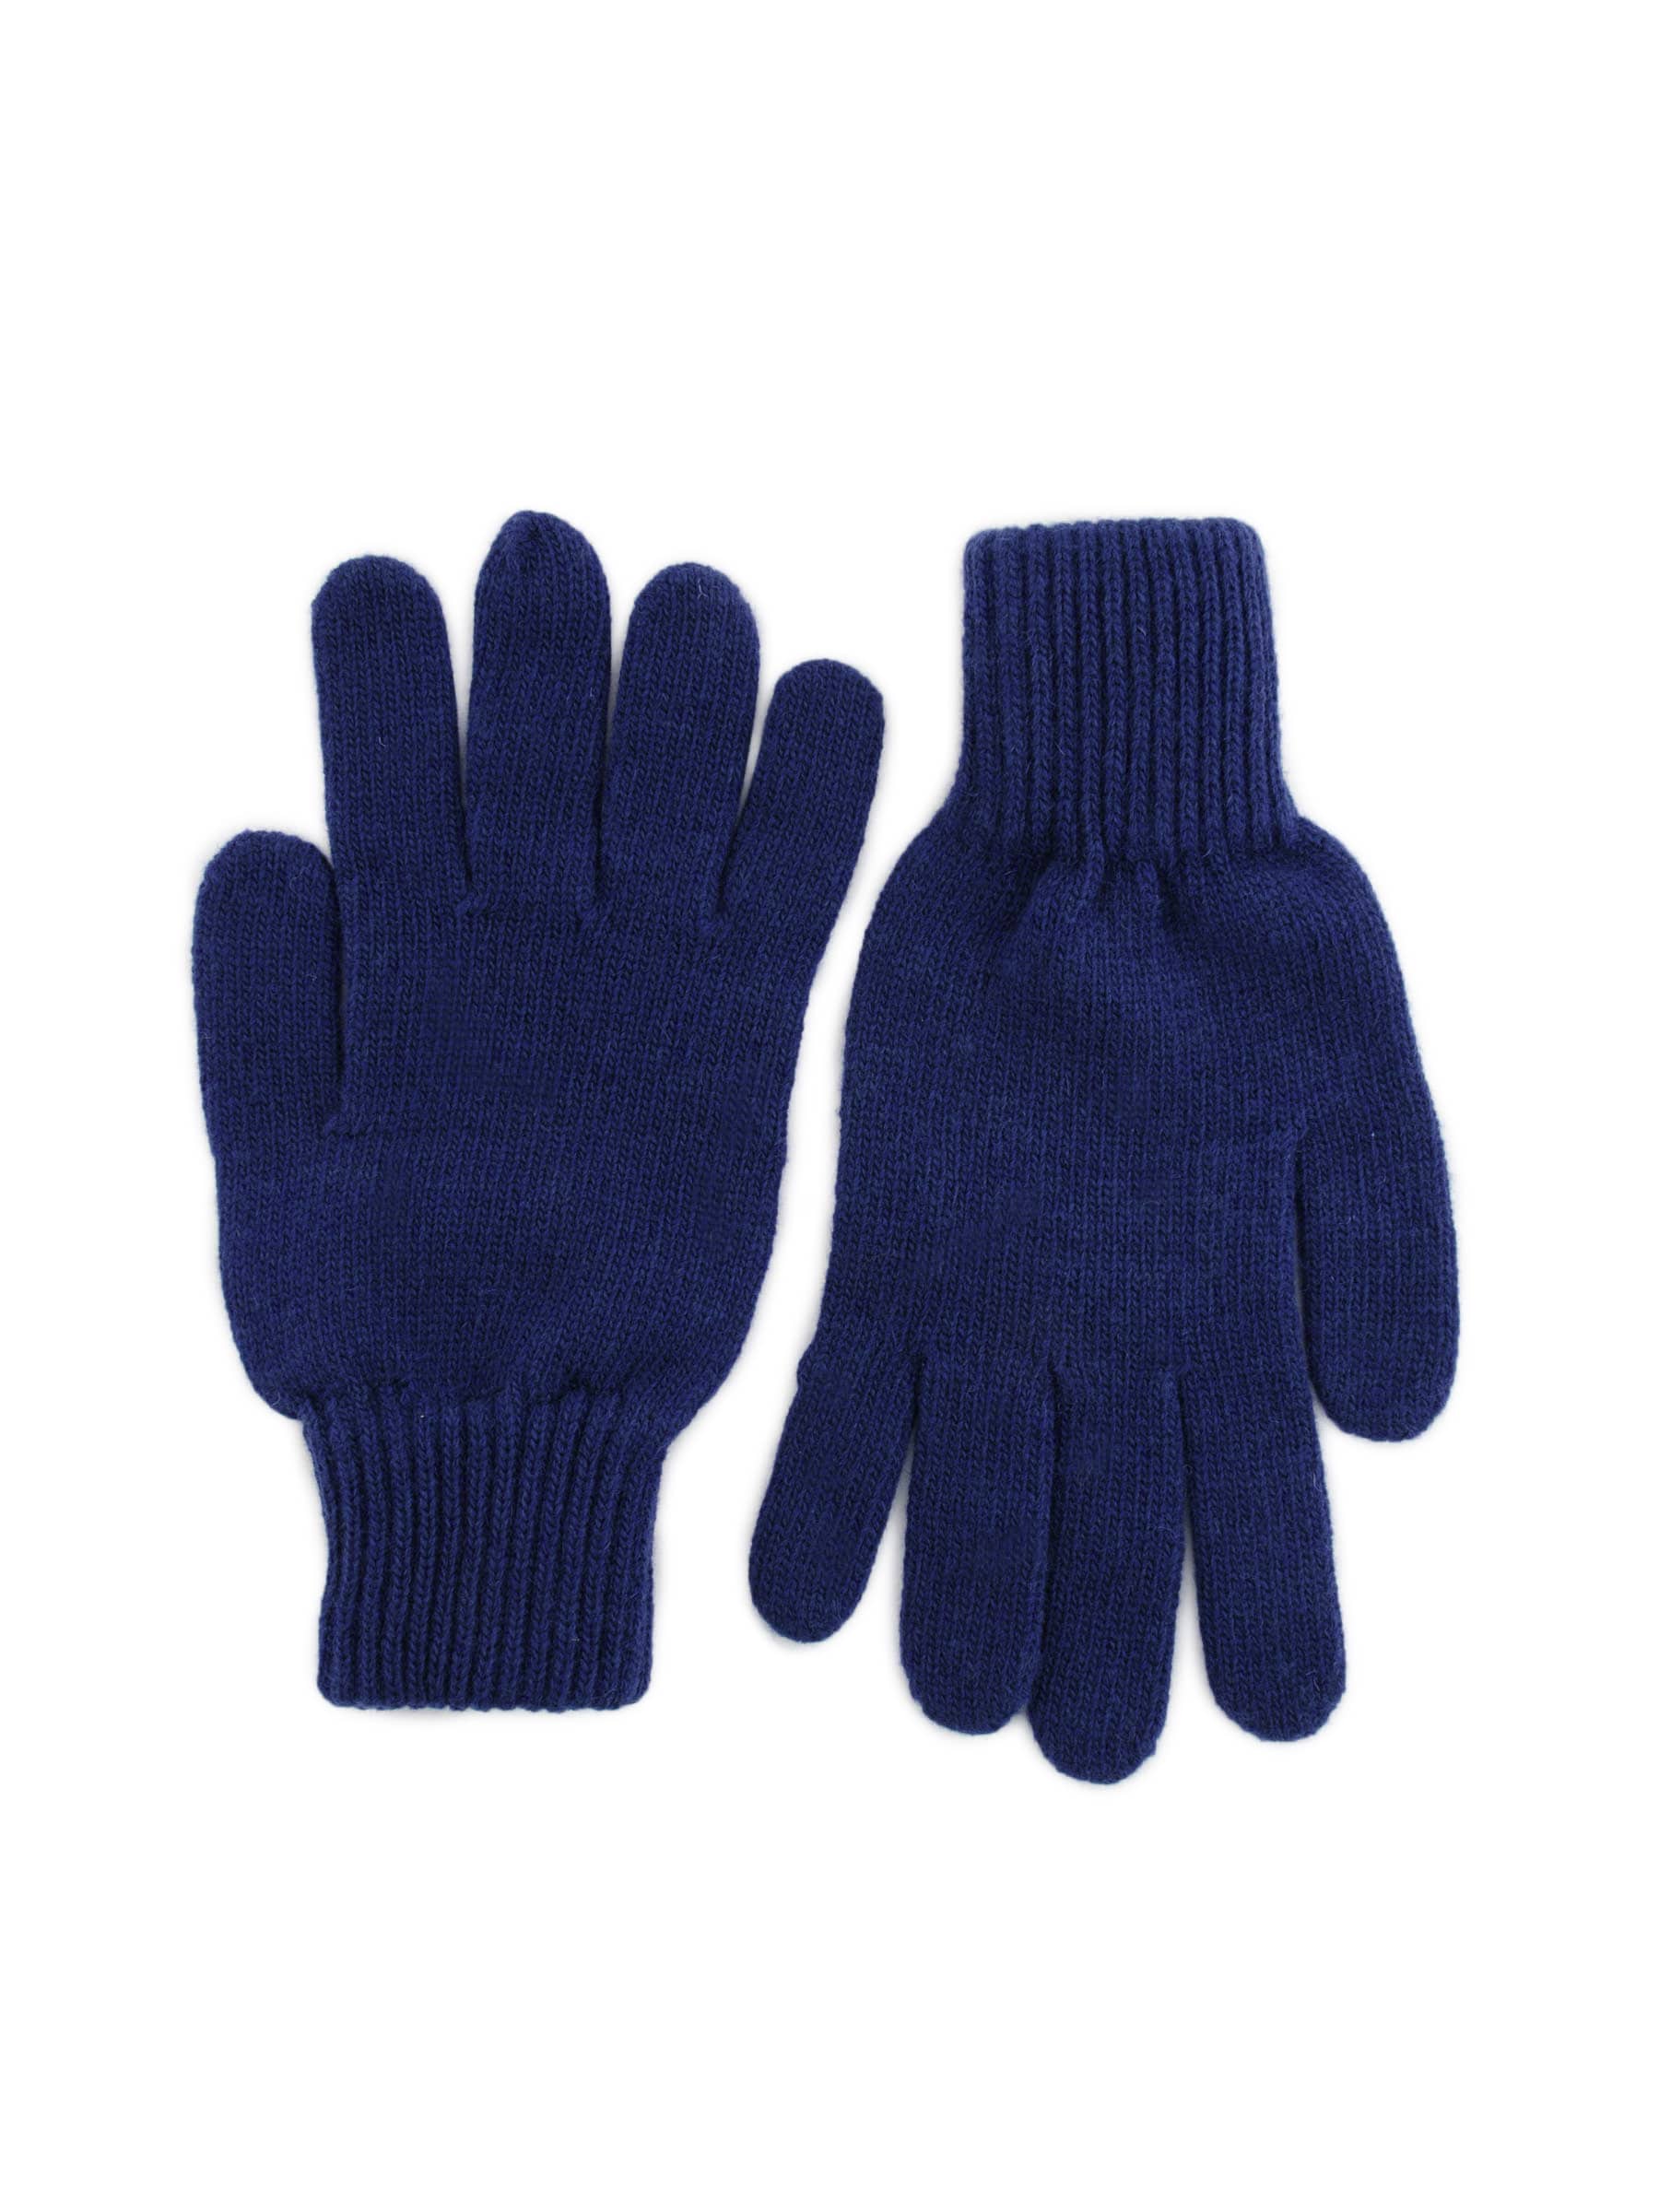 United Colors of Benetton Men Solid Blue Gloves